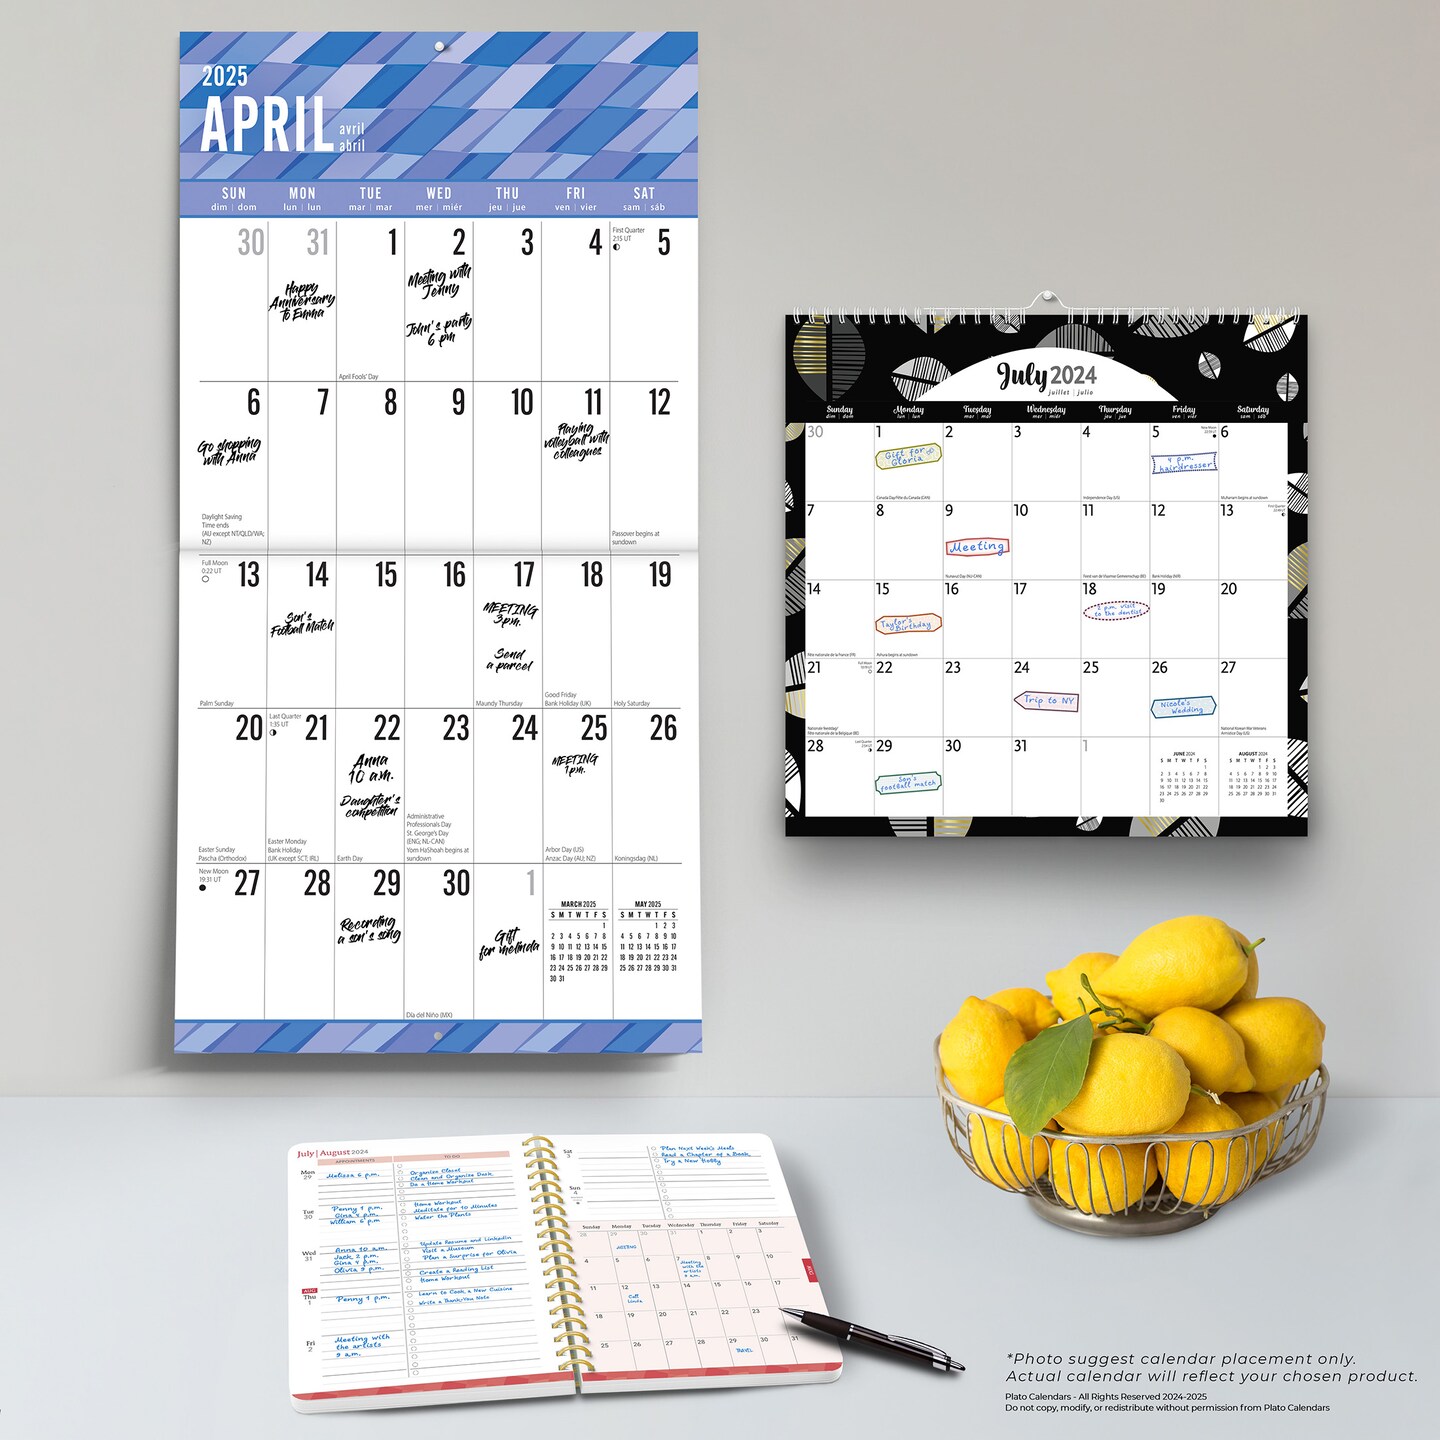 Pen &#x26; Ink and Large Print 2025 18 Months Bundle | Desk Planner, Square Wall, and Square Wire-O Calendar | July 2024 - December 2025 | Plato | Family Stationery Design